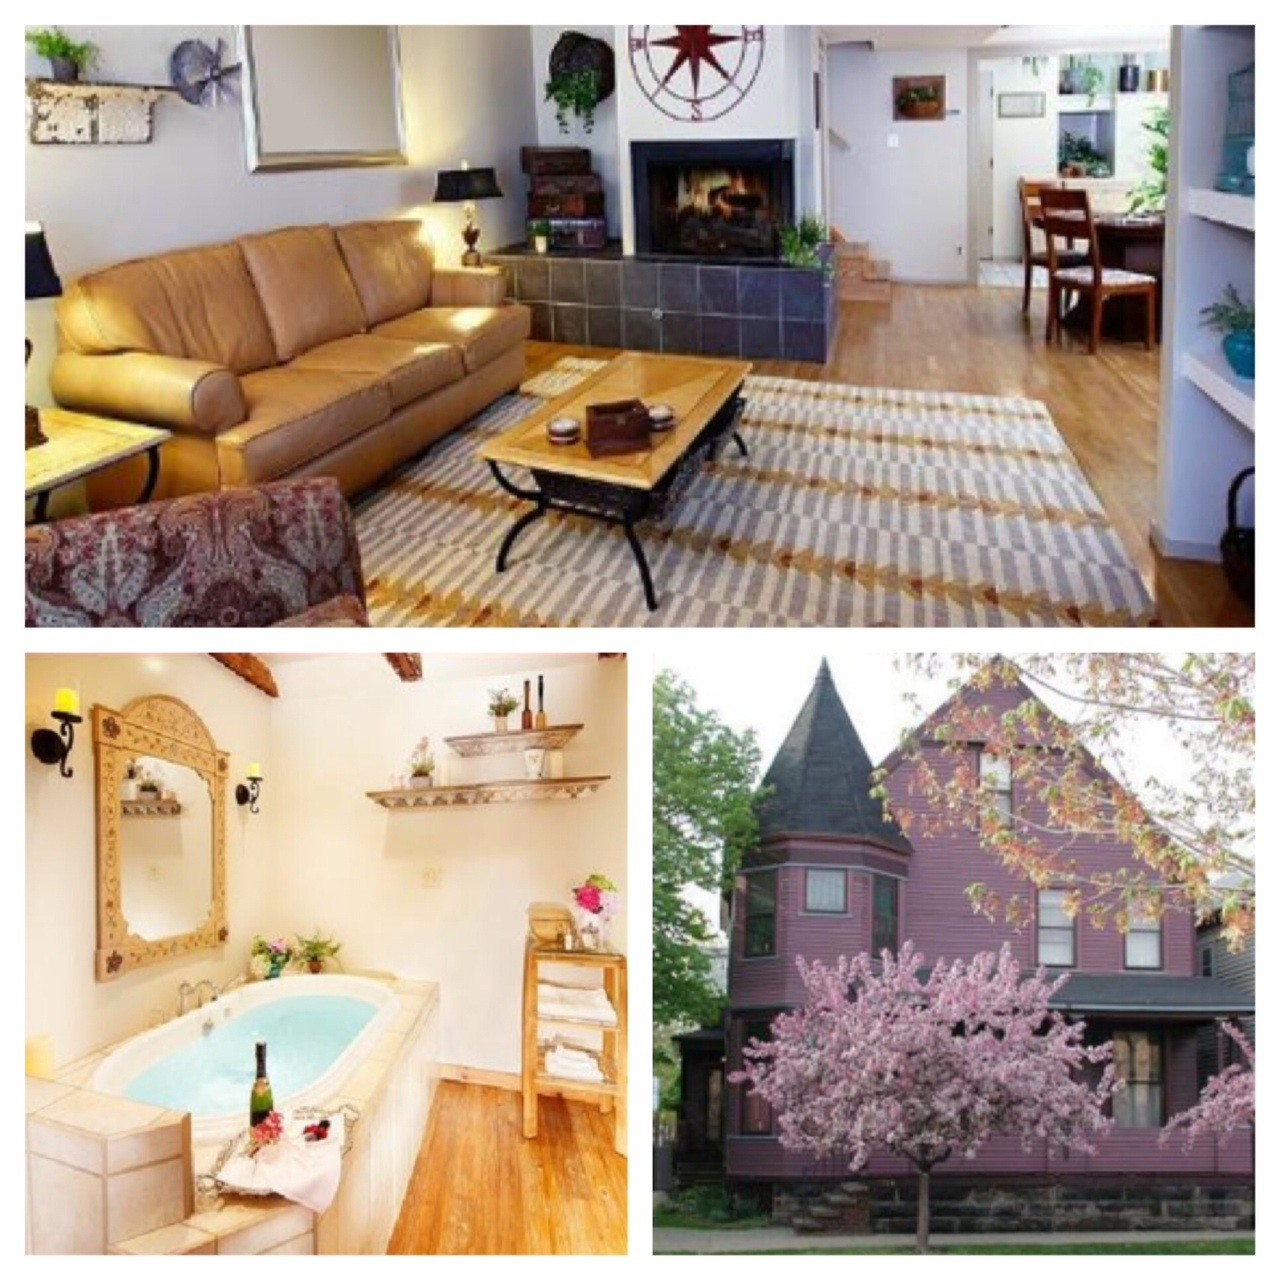 Located in Ohio City, this B&B is close by to the likes of attractions such as the West Side Market and Great Lakes Brewing Company. Its rooms are described as luxurious and spacious, and have amenities like fully stocked kitchens and Jacuzzi tubs.
http://www.jpalenhouse.com/